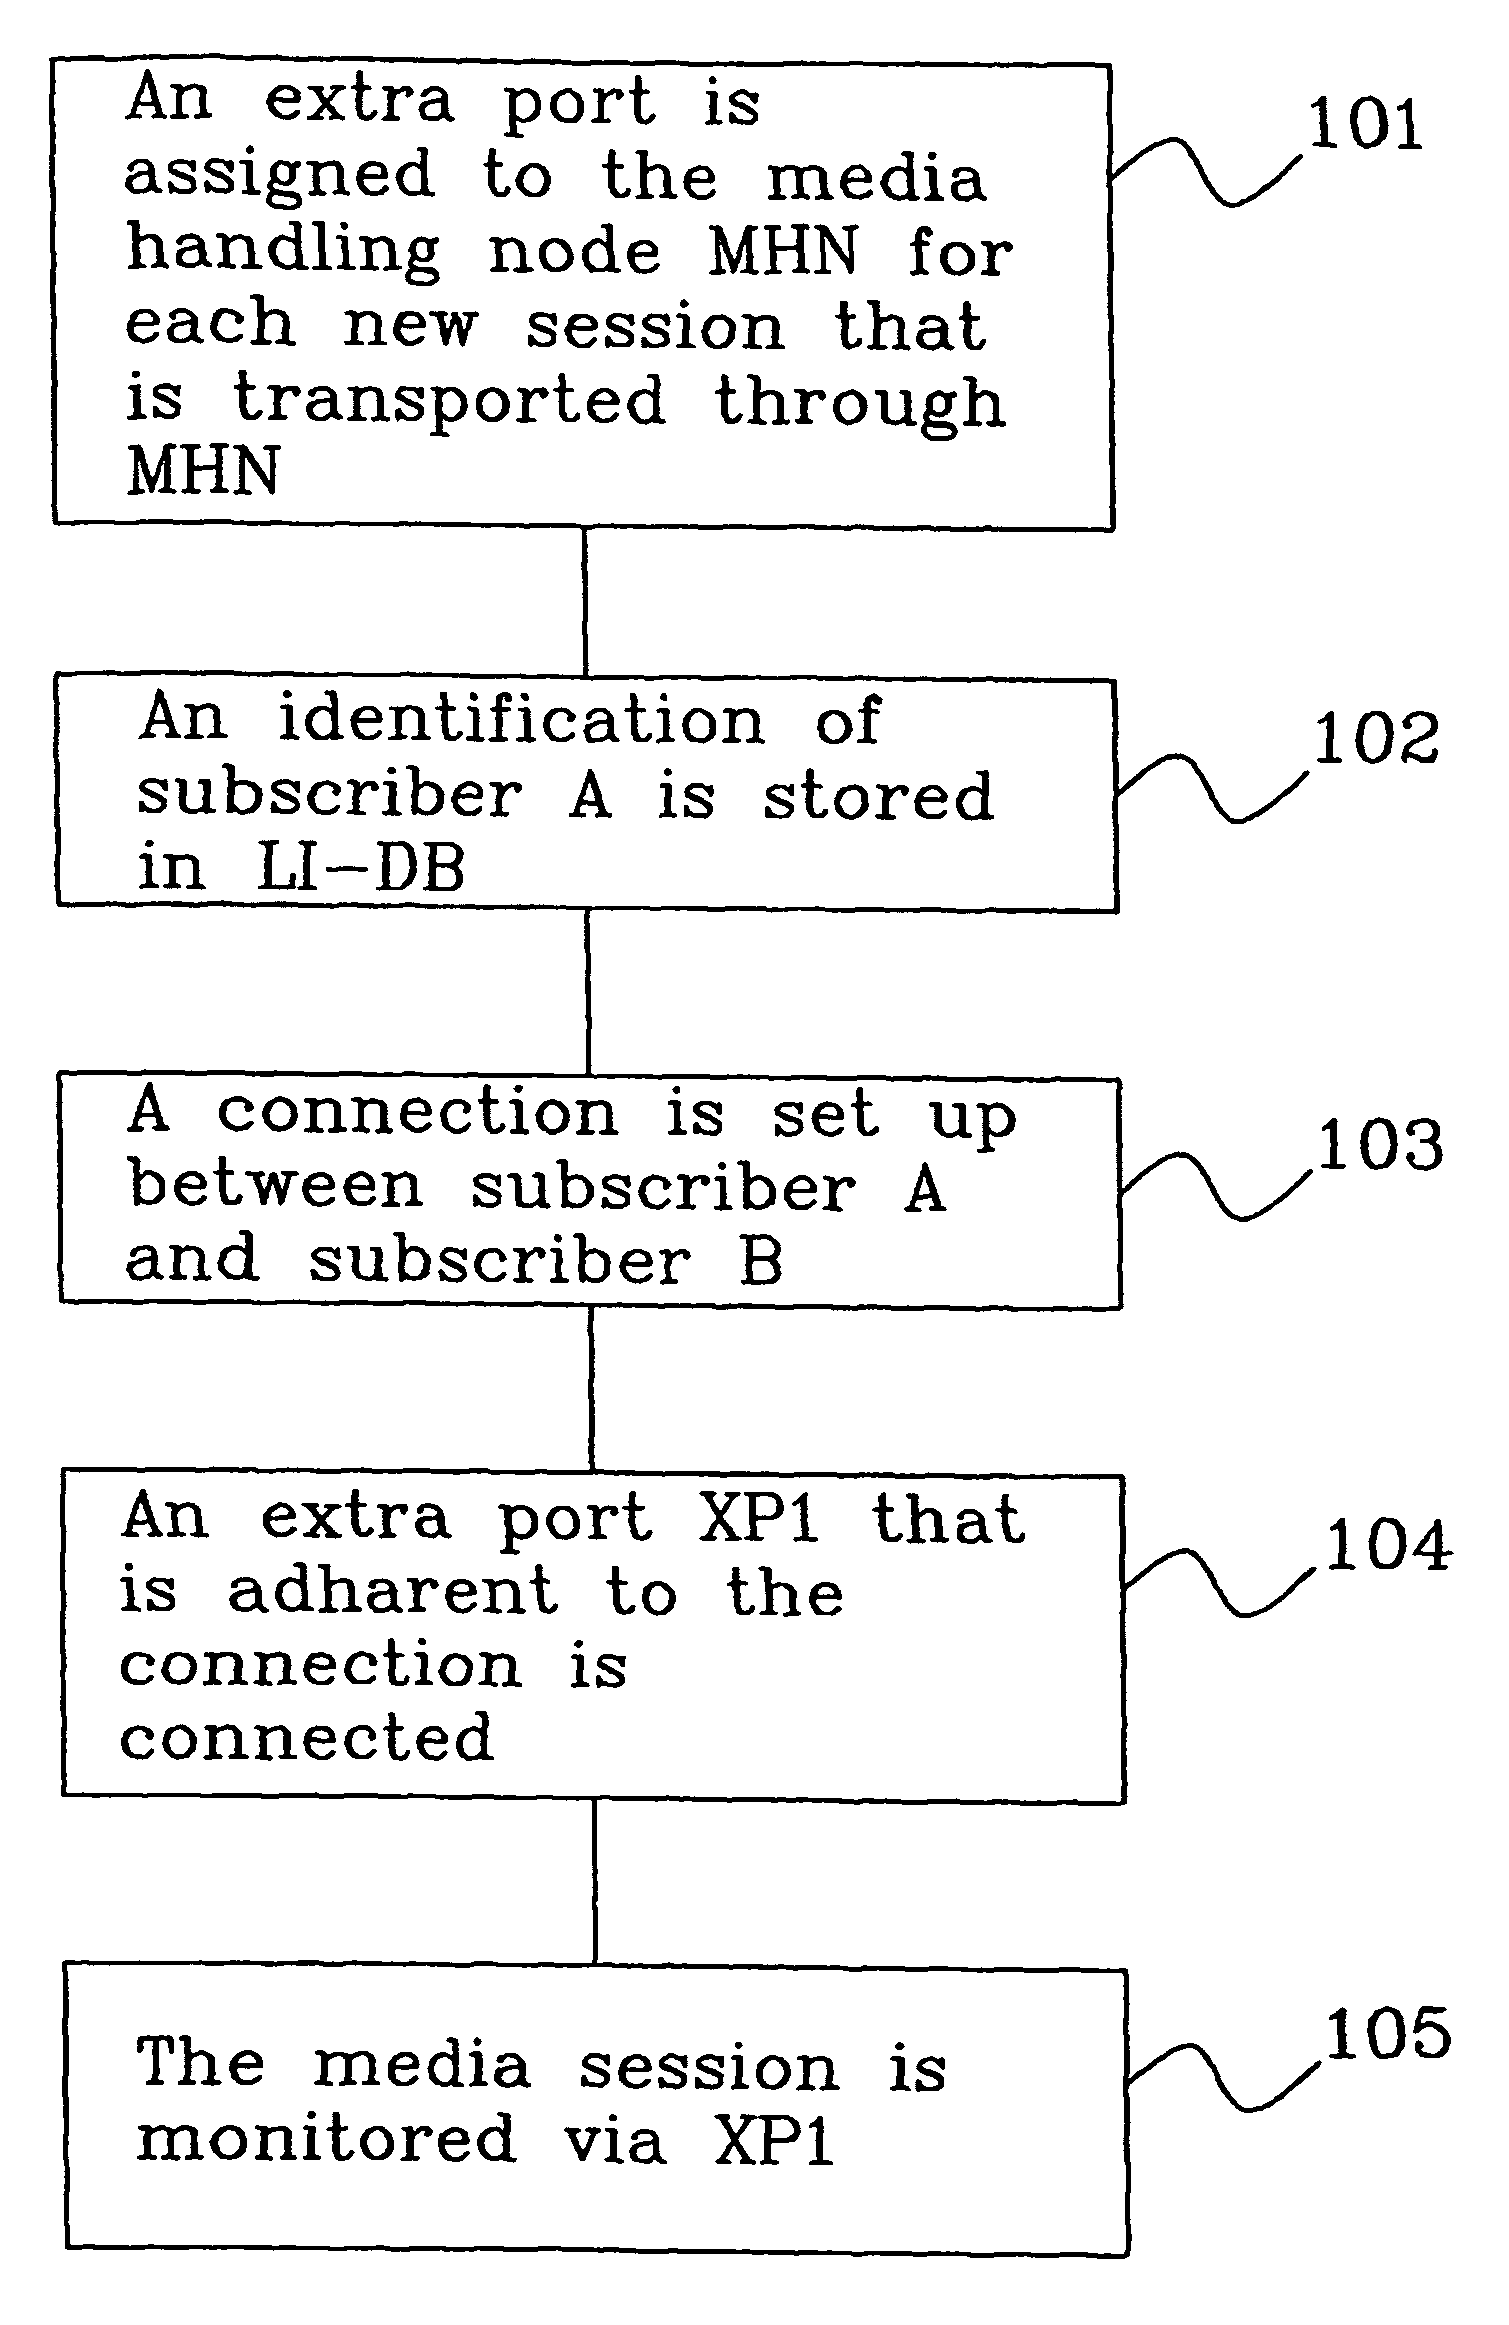 Monitoring in a telecommunication network